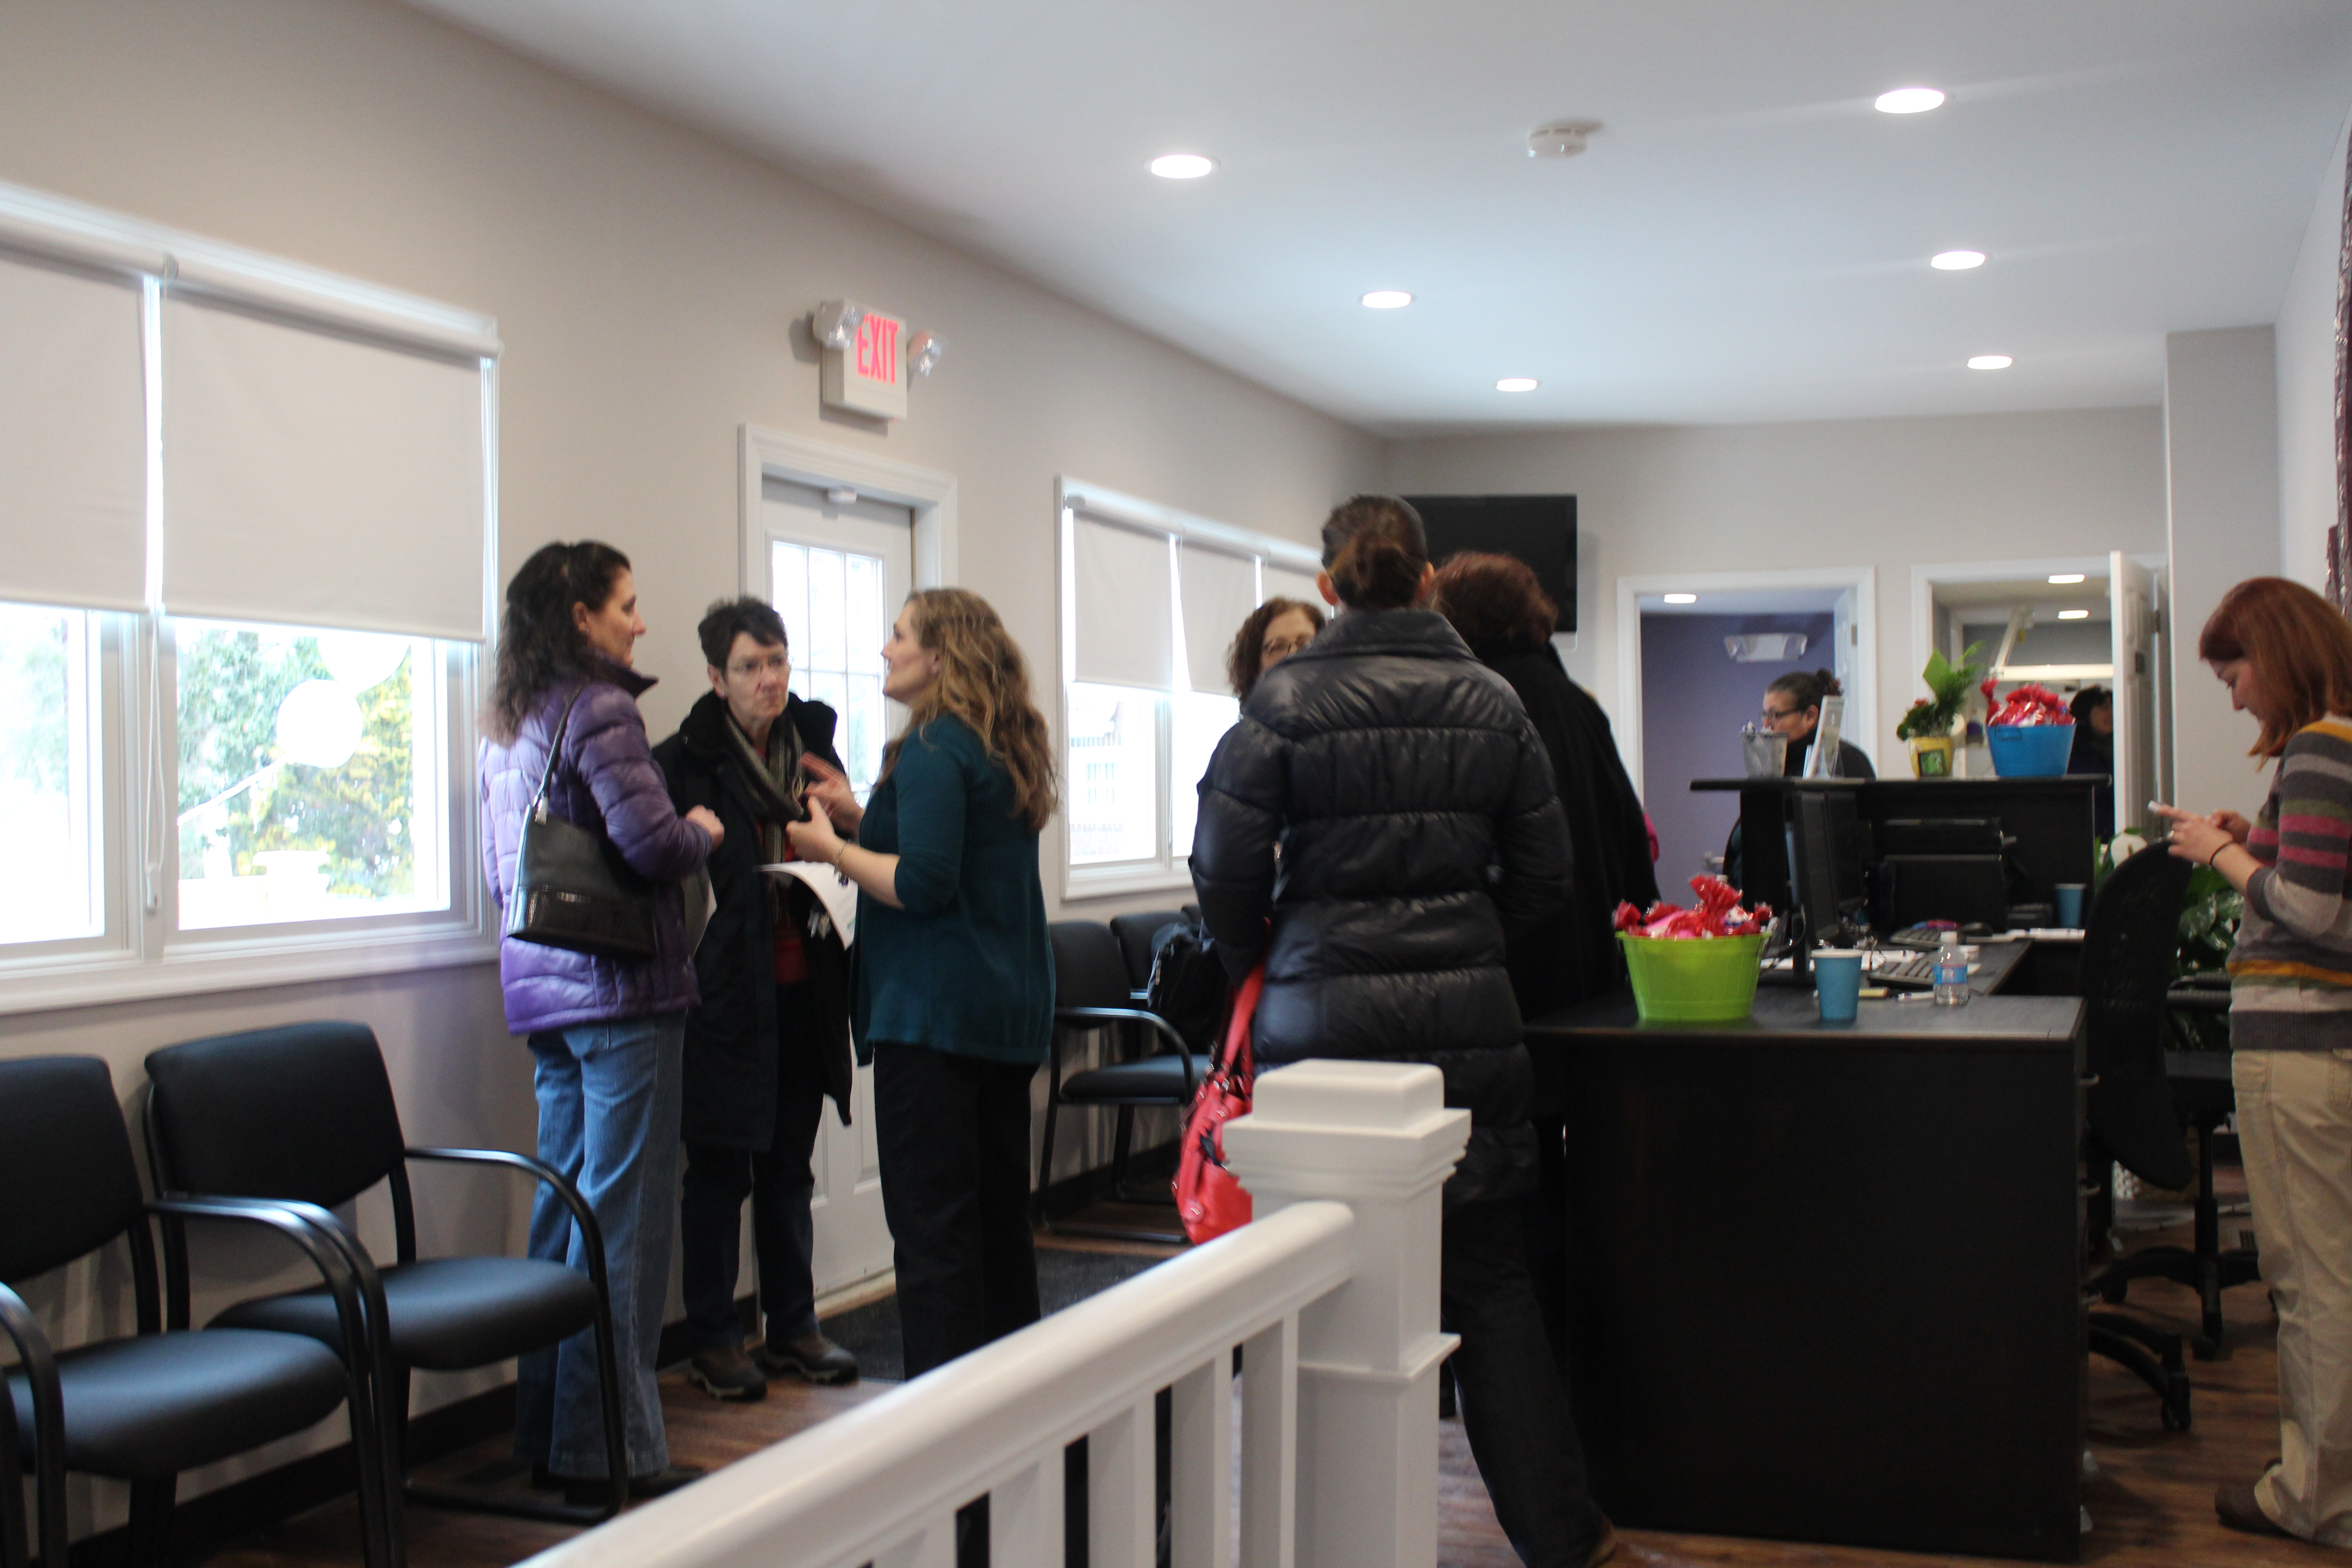 Guests gathering in our reception area